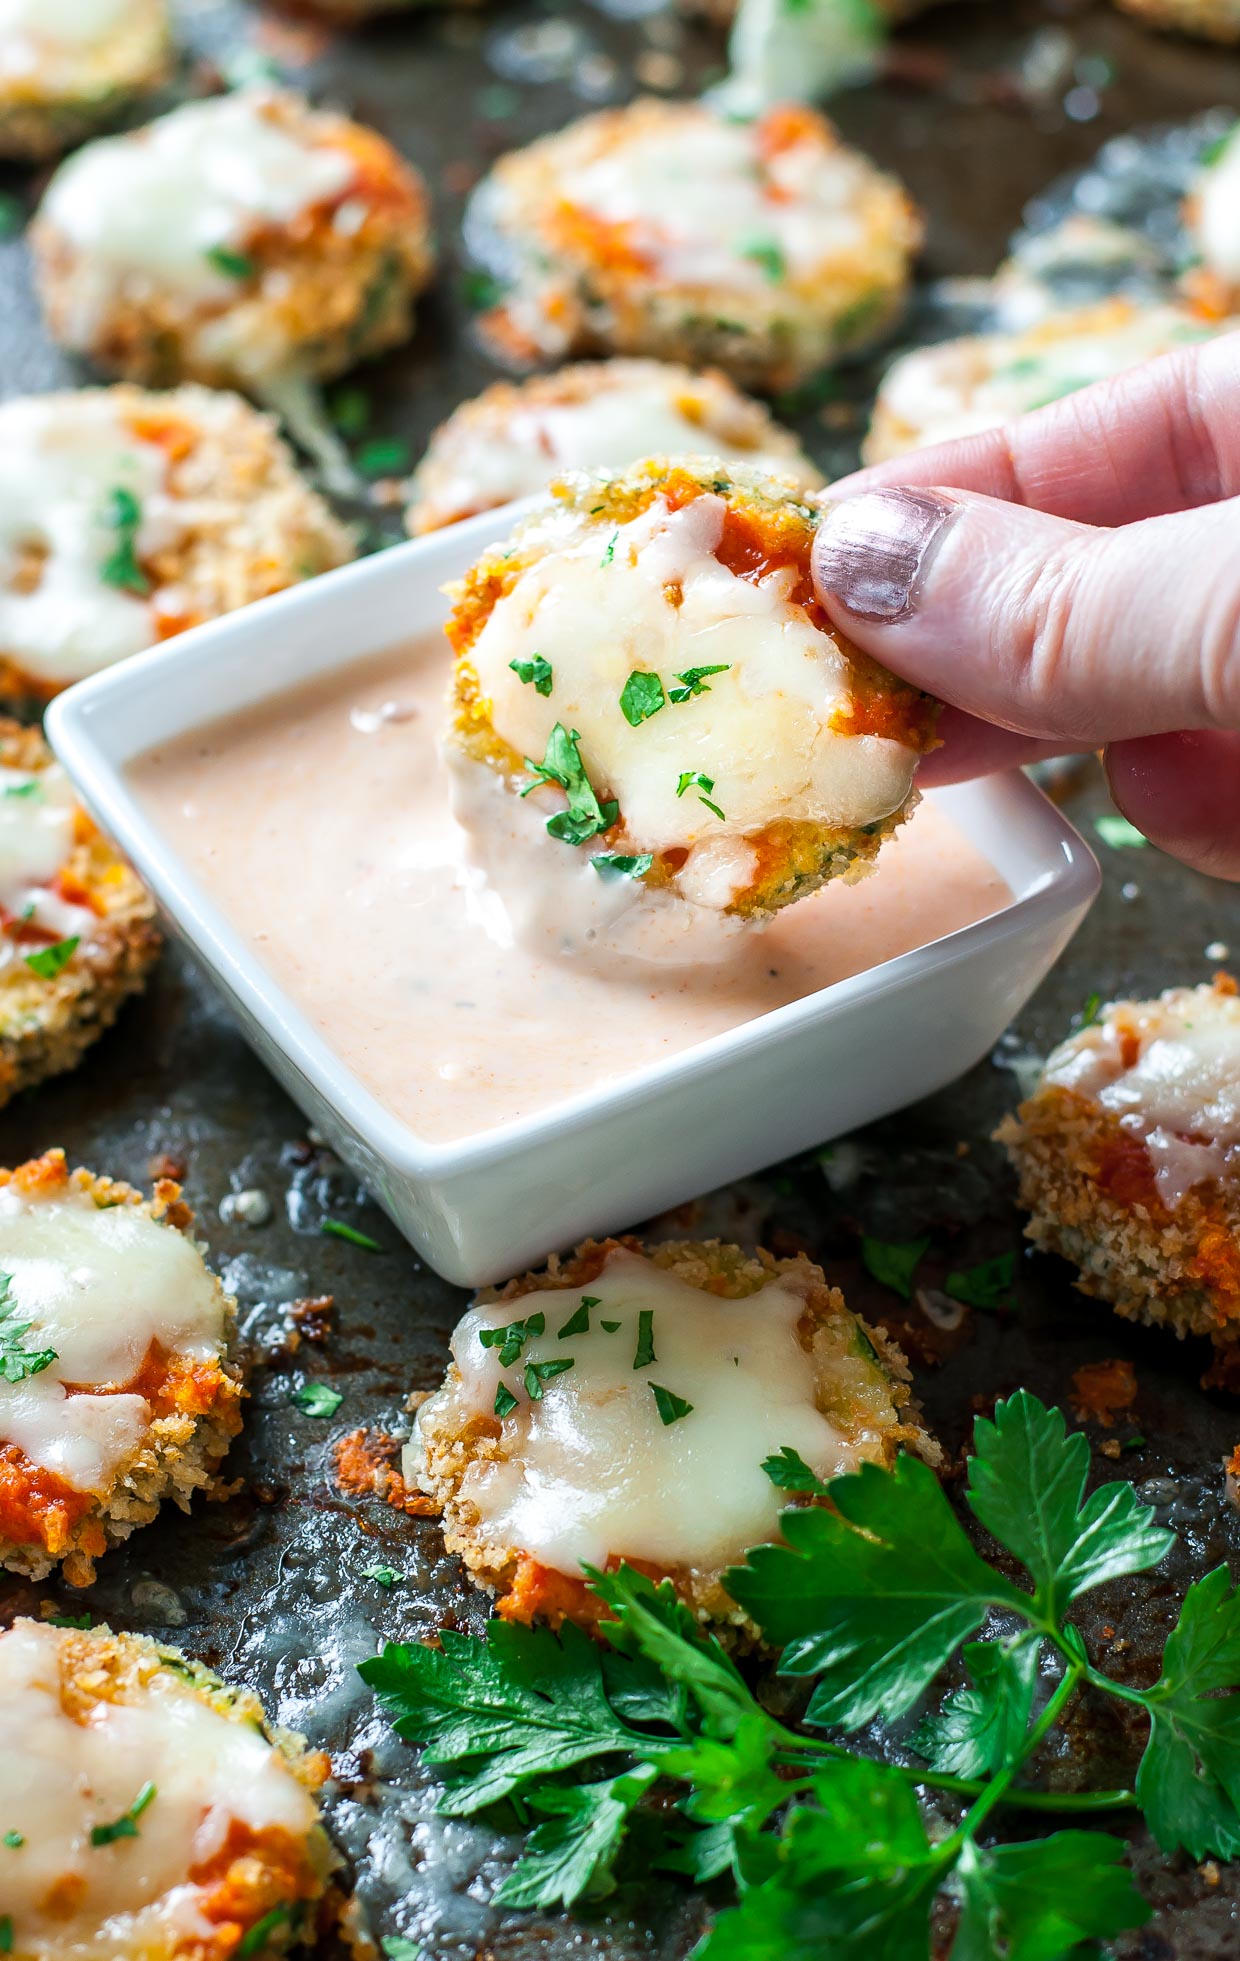 Cheesy Baked Buffalo Zucchini Chips let veggies in on the fun of game day snacking! Add buffalo sauce to your favorite ranch for a delicious dip.